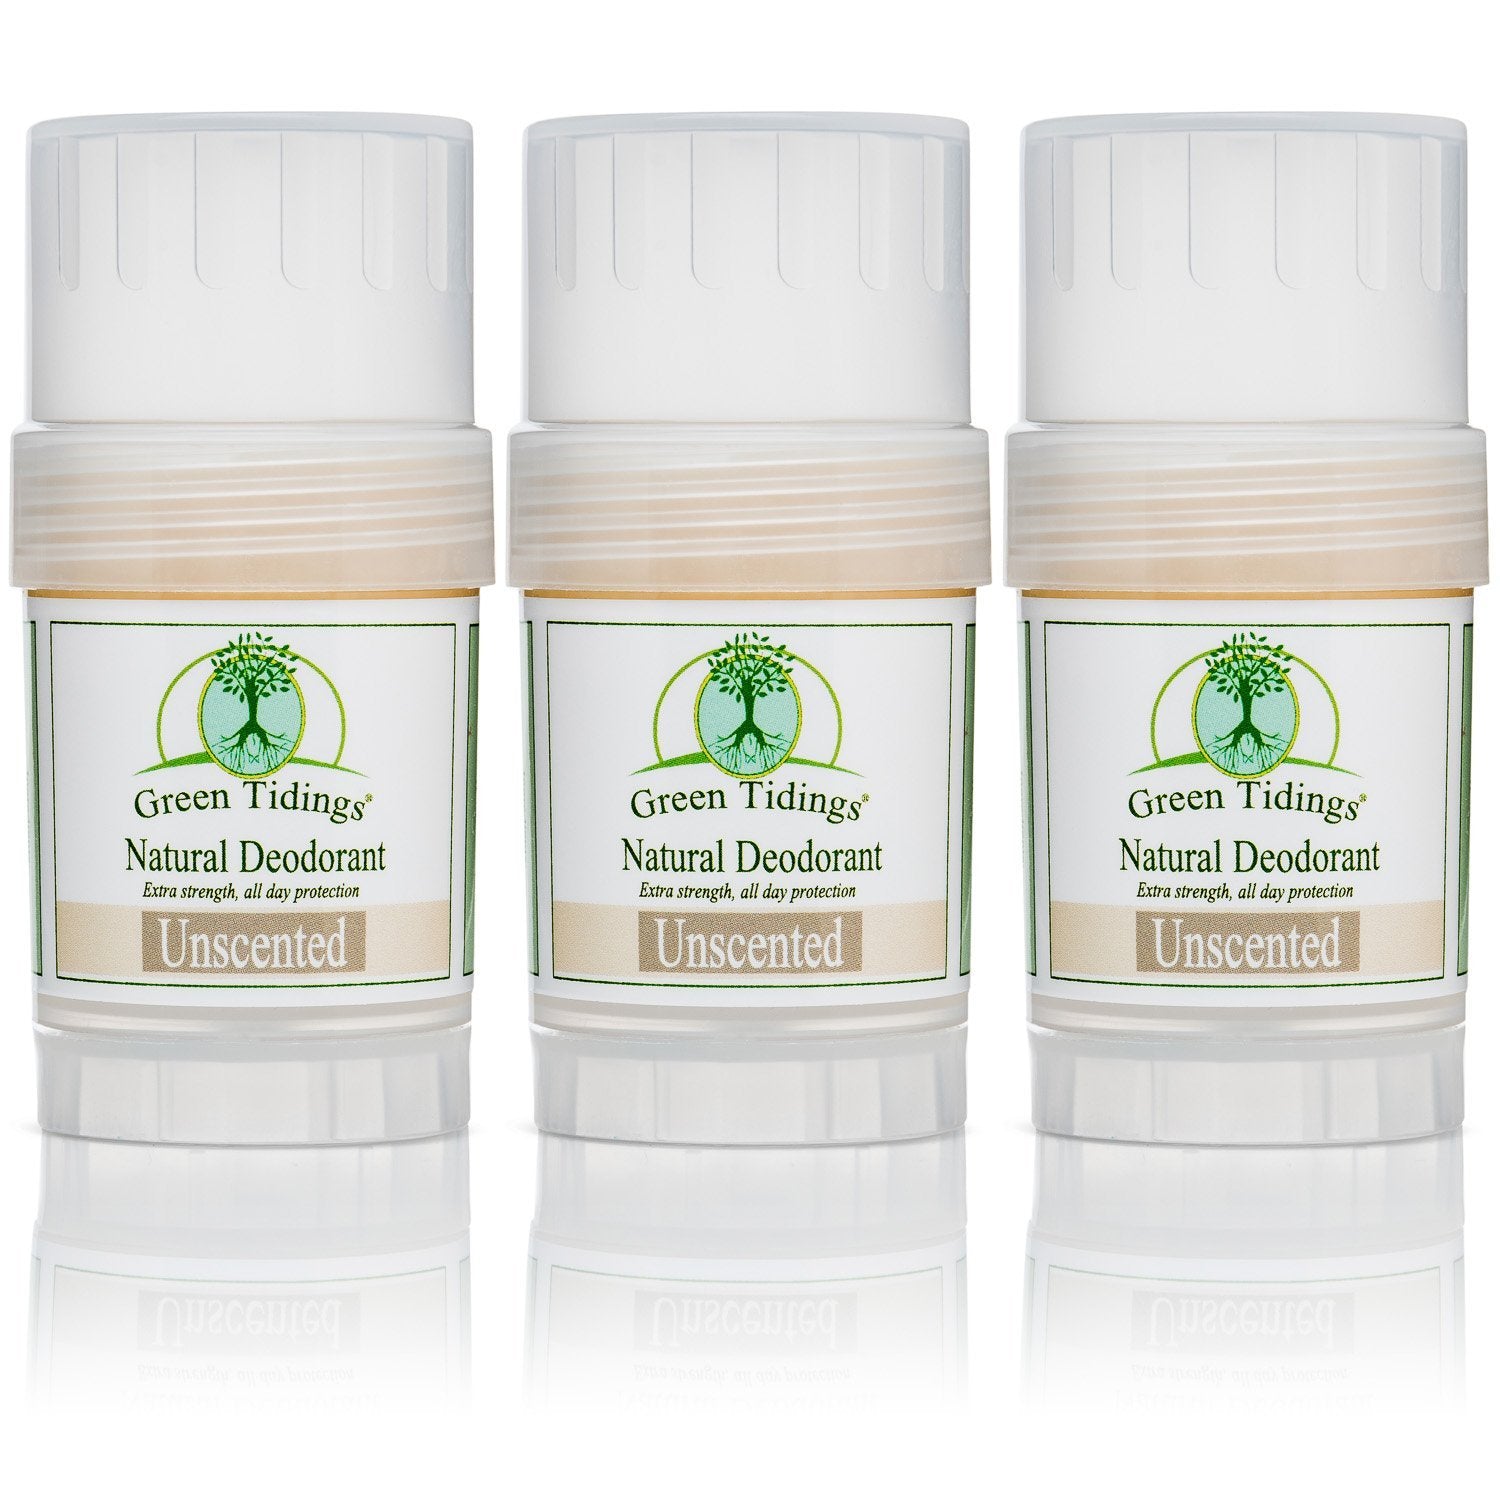 Green Tidings All Natural Deodorant- Unscented 1 Ounce 3 PACK - Green Tidings